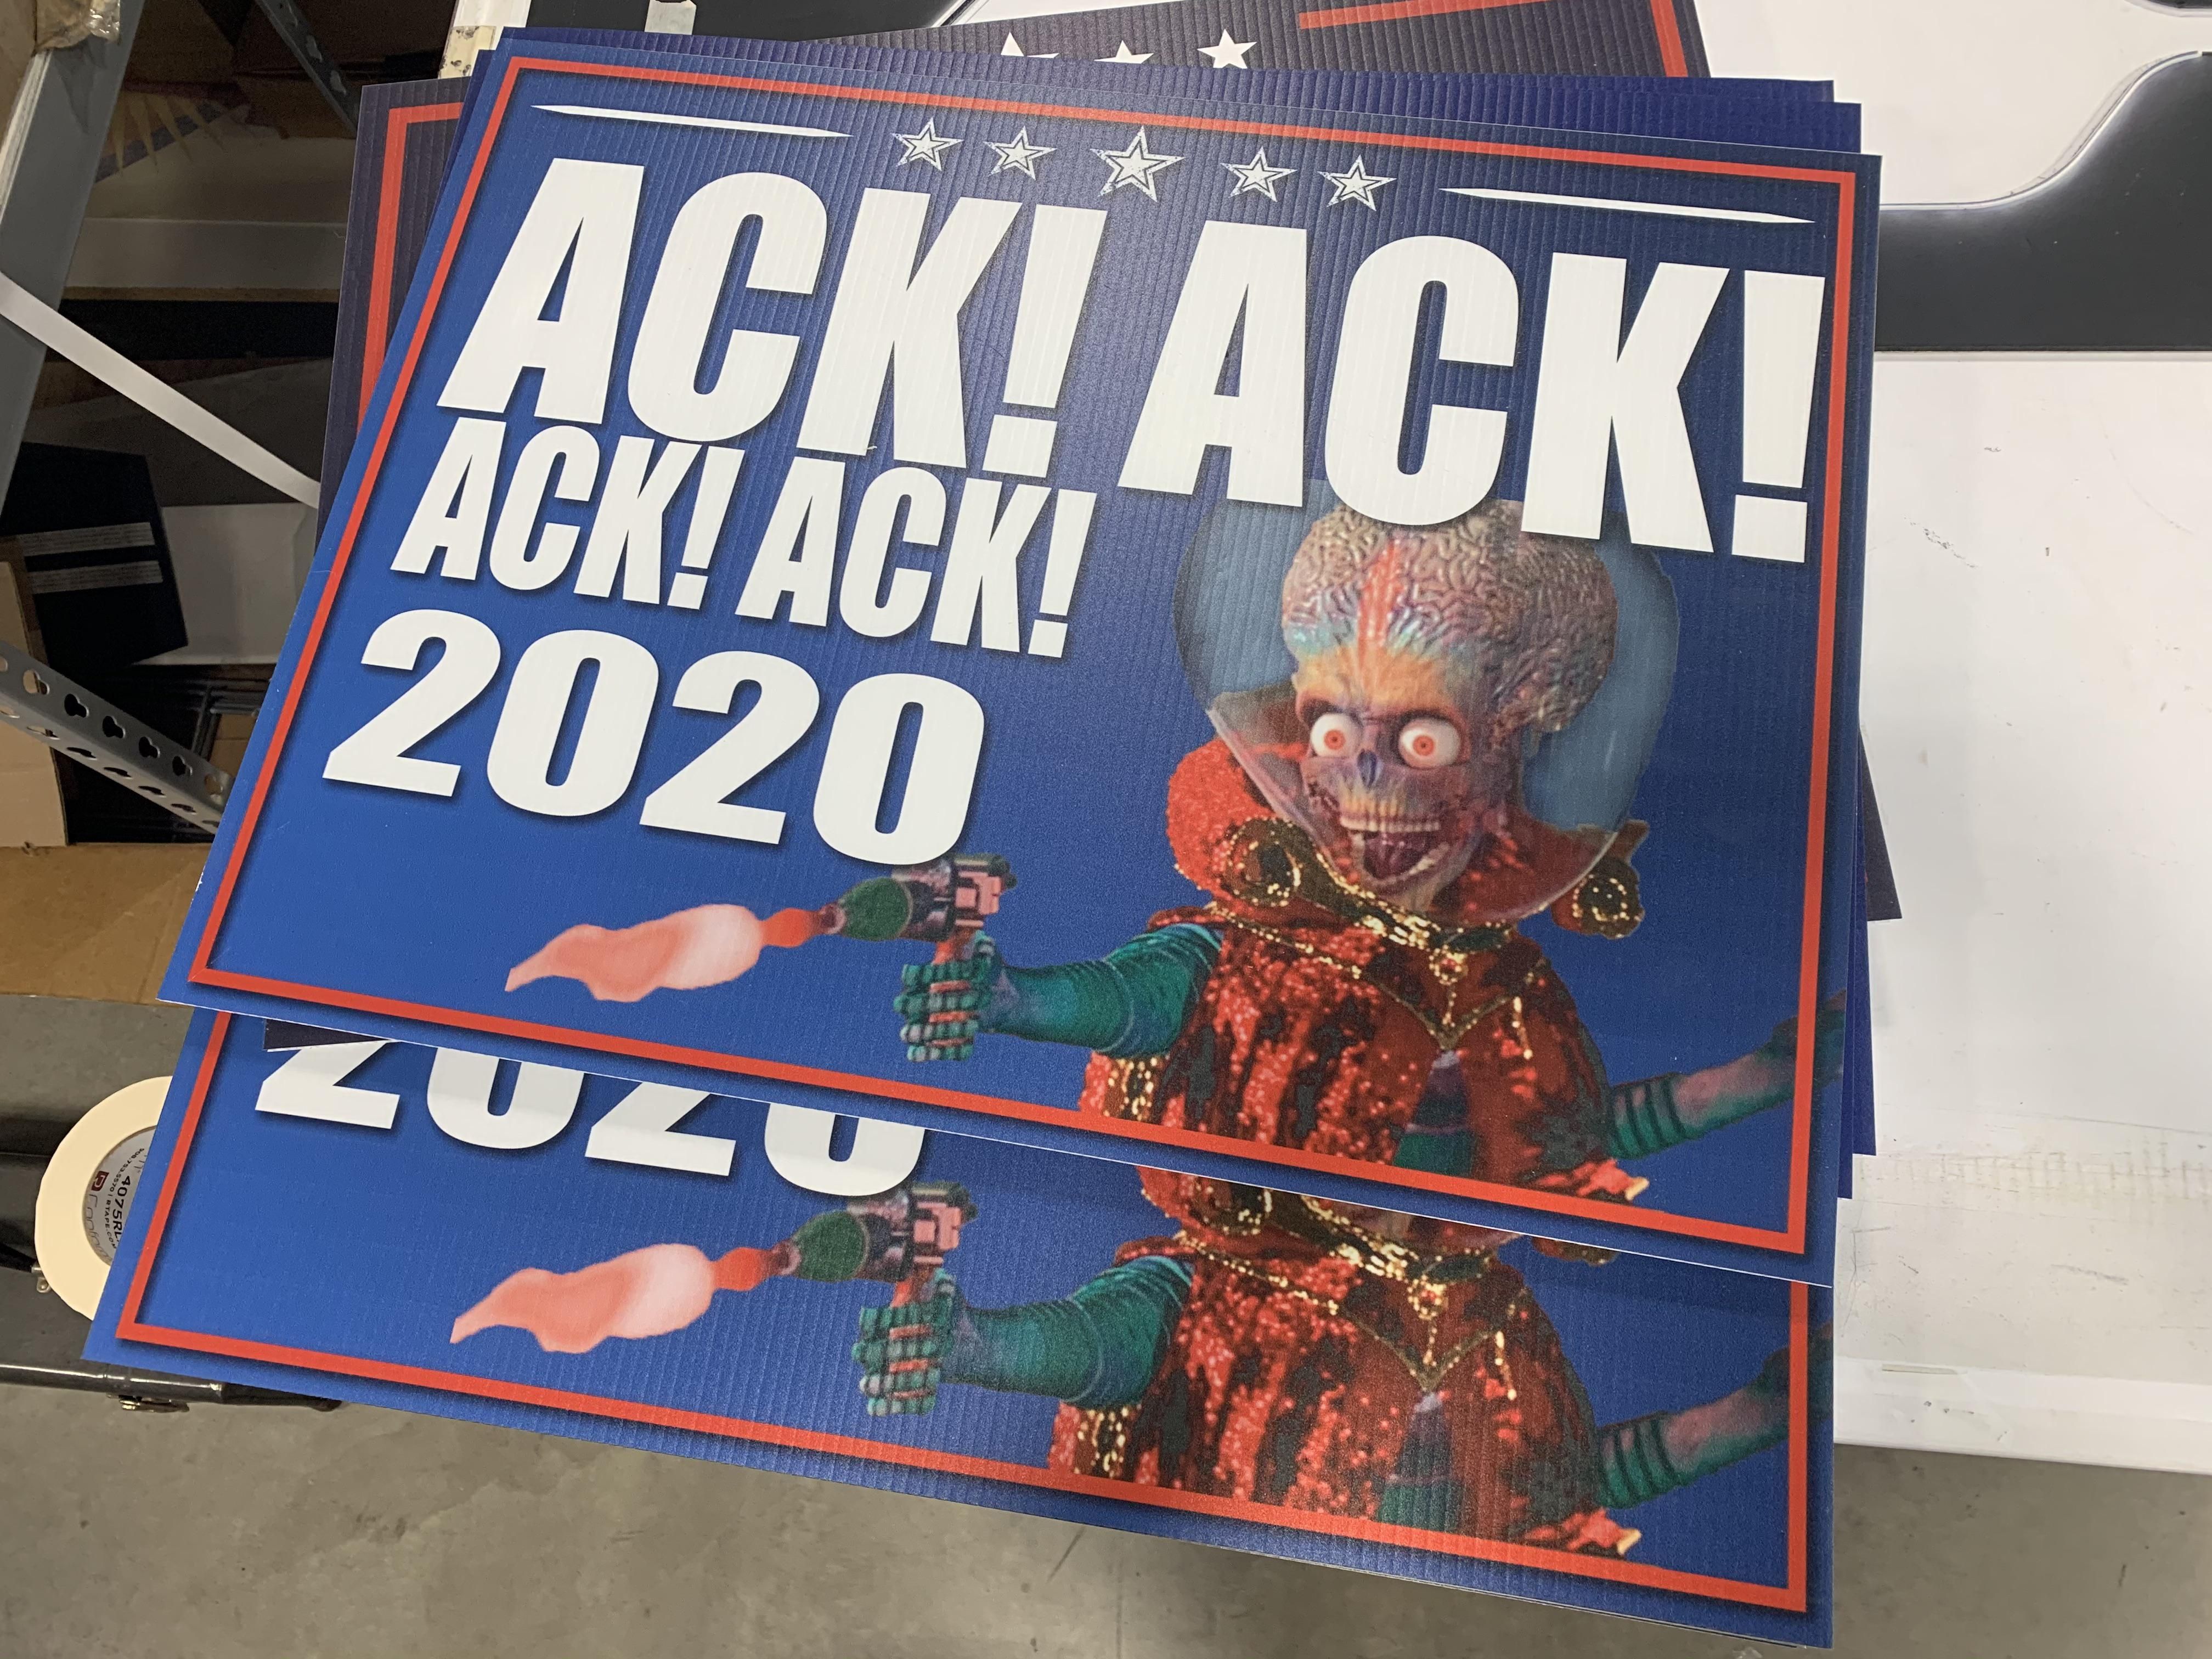 I work in a print shop, made my new yard signs today